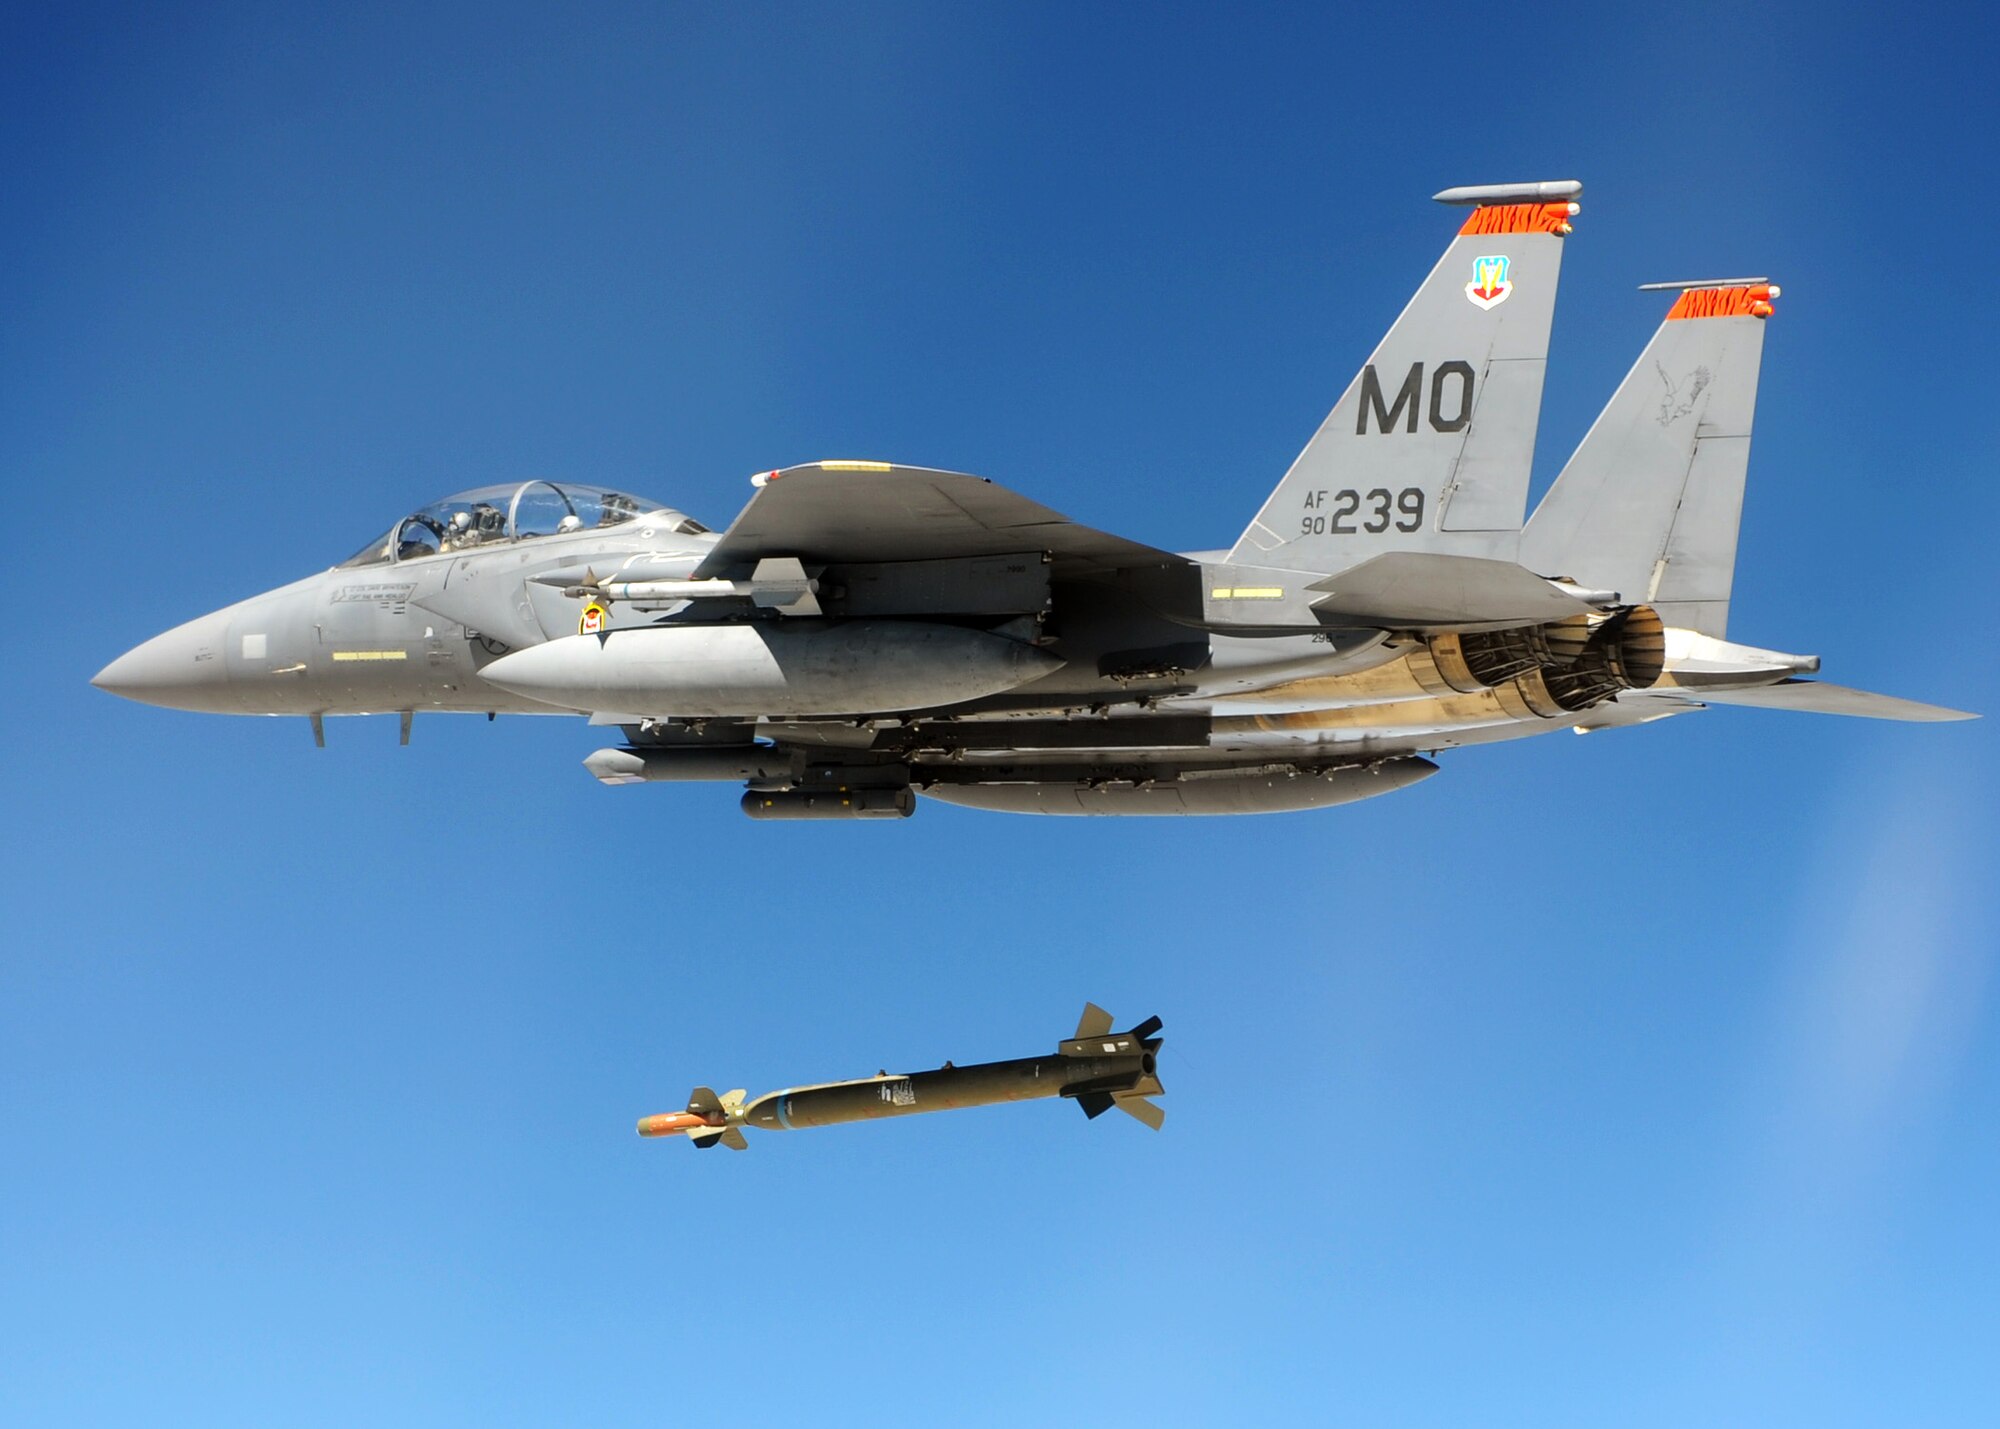 An F-15E Strike Eagle from the 391st Fighter Squadron drops a Guided Bomb Unit-28 during a Combat Hammer mission at Hill Air Force Base, Utah. Combat Hammer is an Air-to-Ground Weapons System Evaluation Program maintained by the 86th Fighter Weapons Squadron.  Combat Hammer marked the first of three weeks of evaluation at Hill AFB by the 53rd Weapons Evaluation Group.  Combat Archer, an air-to-air evaluation, is the second week, followed by a combined air and ground WSEP in the final week.  The WSEP program is used to evaluate the effectiveness and suitability of combat air force weapon systems. The evaluations are accomplished during tactical deliveries of fighter, bomber and unmanned aerial system precision guided munitions, on realistic targets with air-to-air and surface-to-air defenses. For many of the aircrew participating in WSEP, it is the first time employing live weapons. This provides a level of combat experience many units face during combat. (Courtesy photo.)
